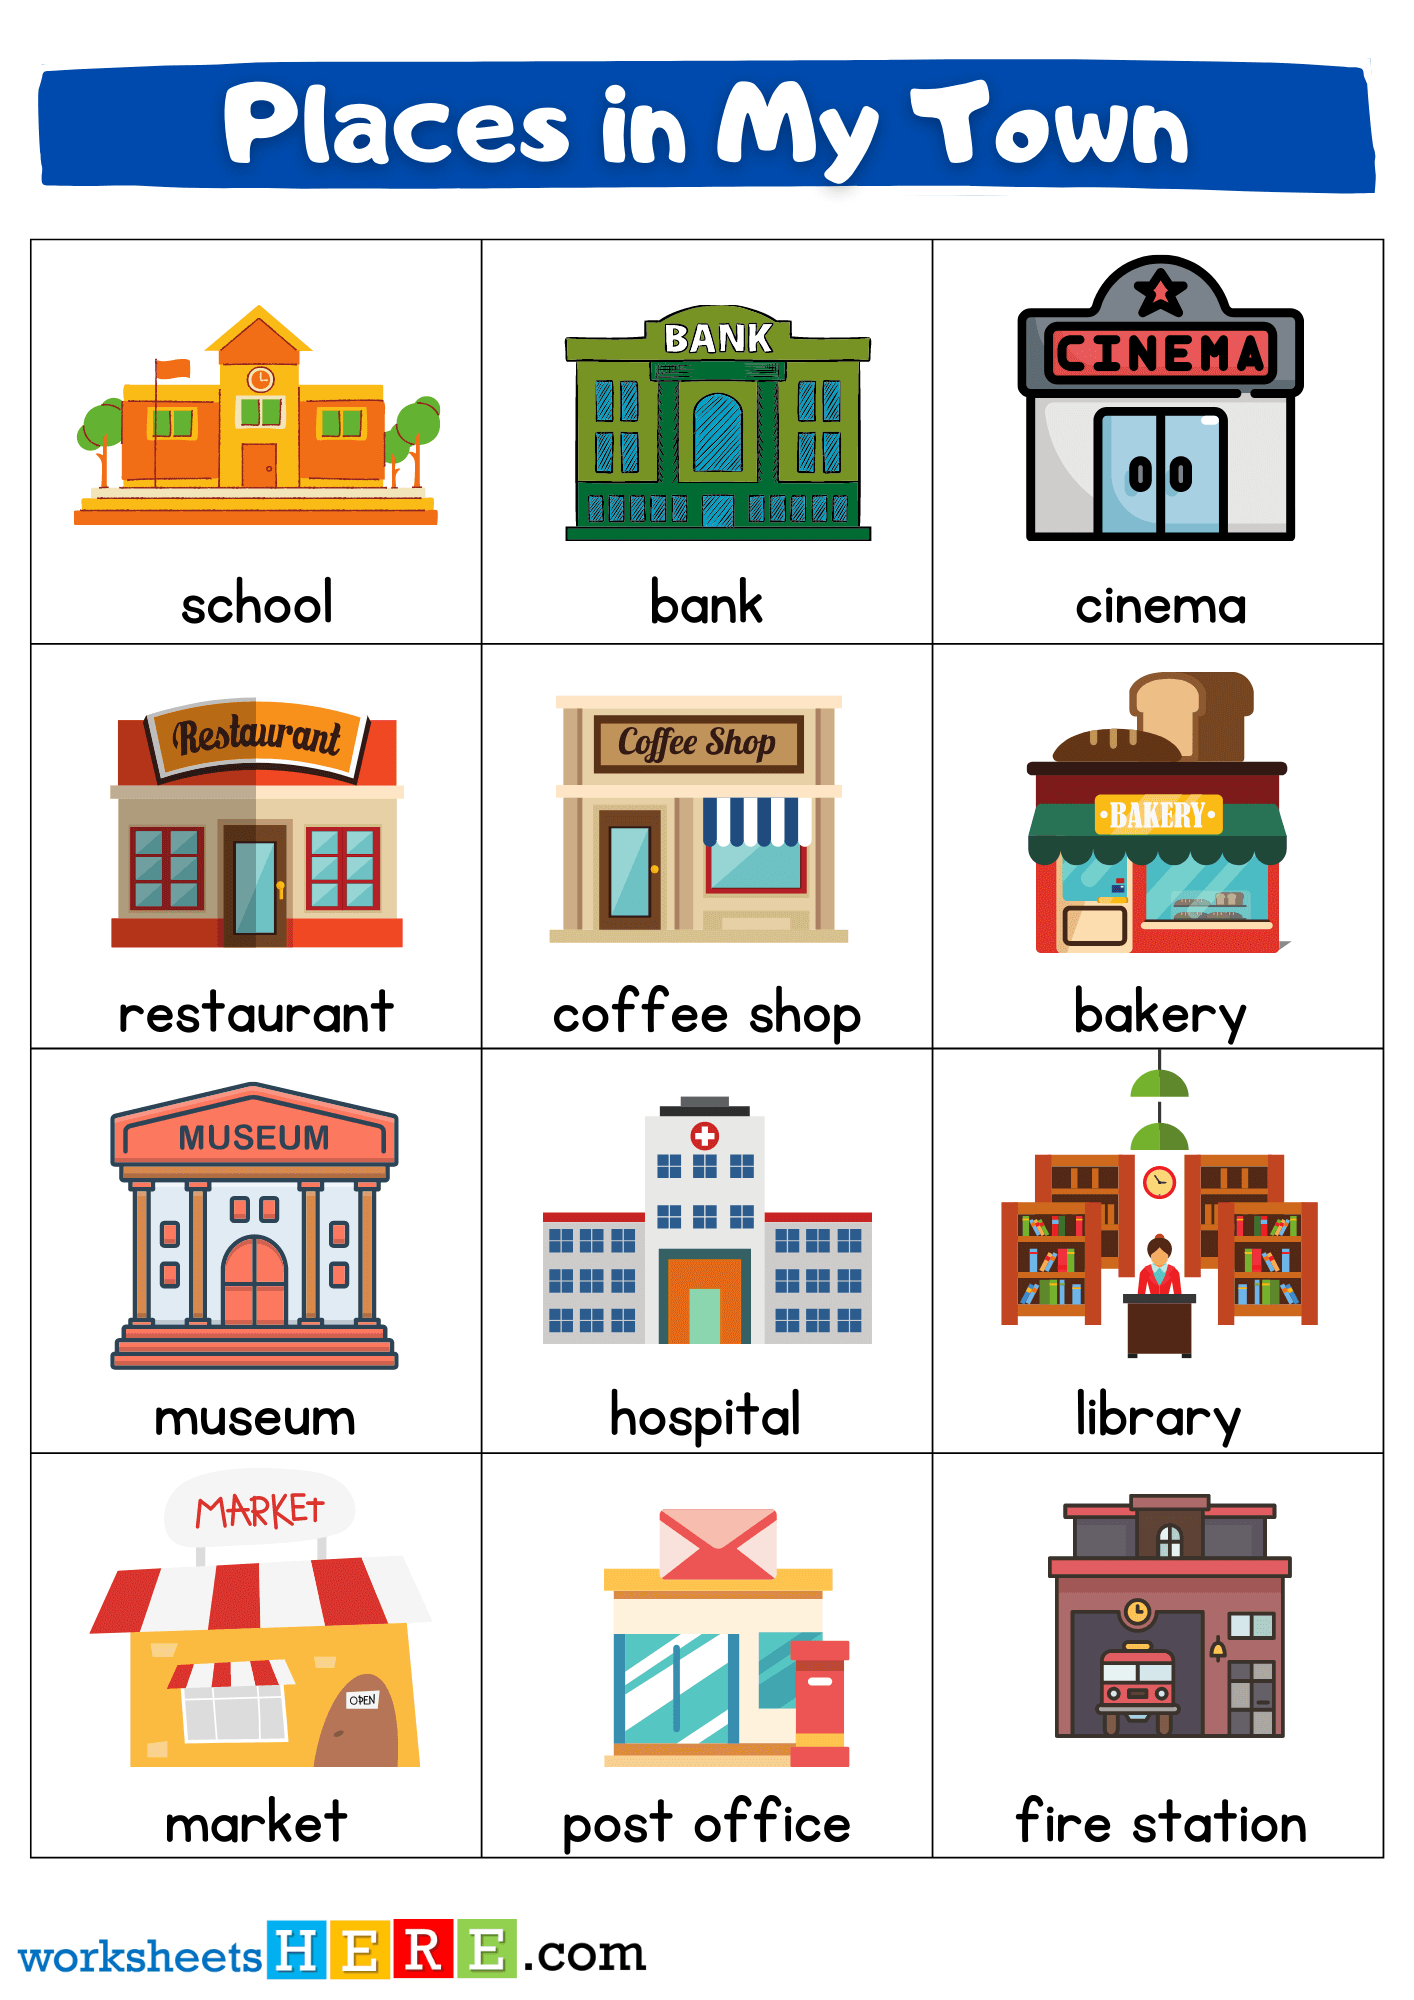 Places in My Town Flashcards, Town City Places Names List with Pictures